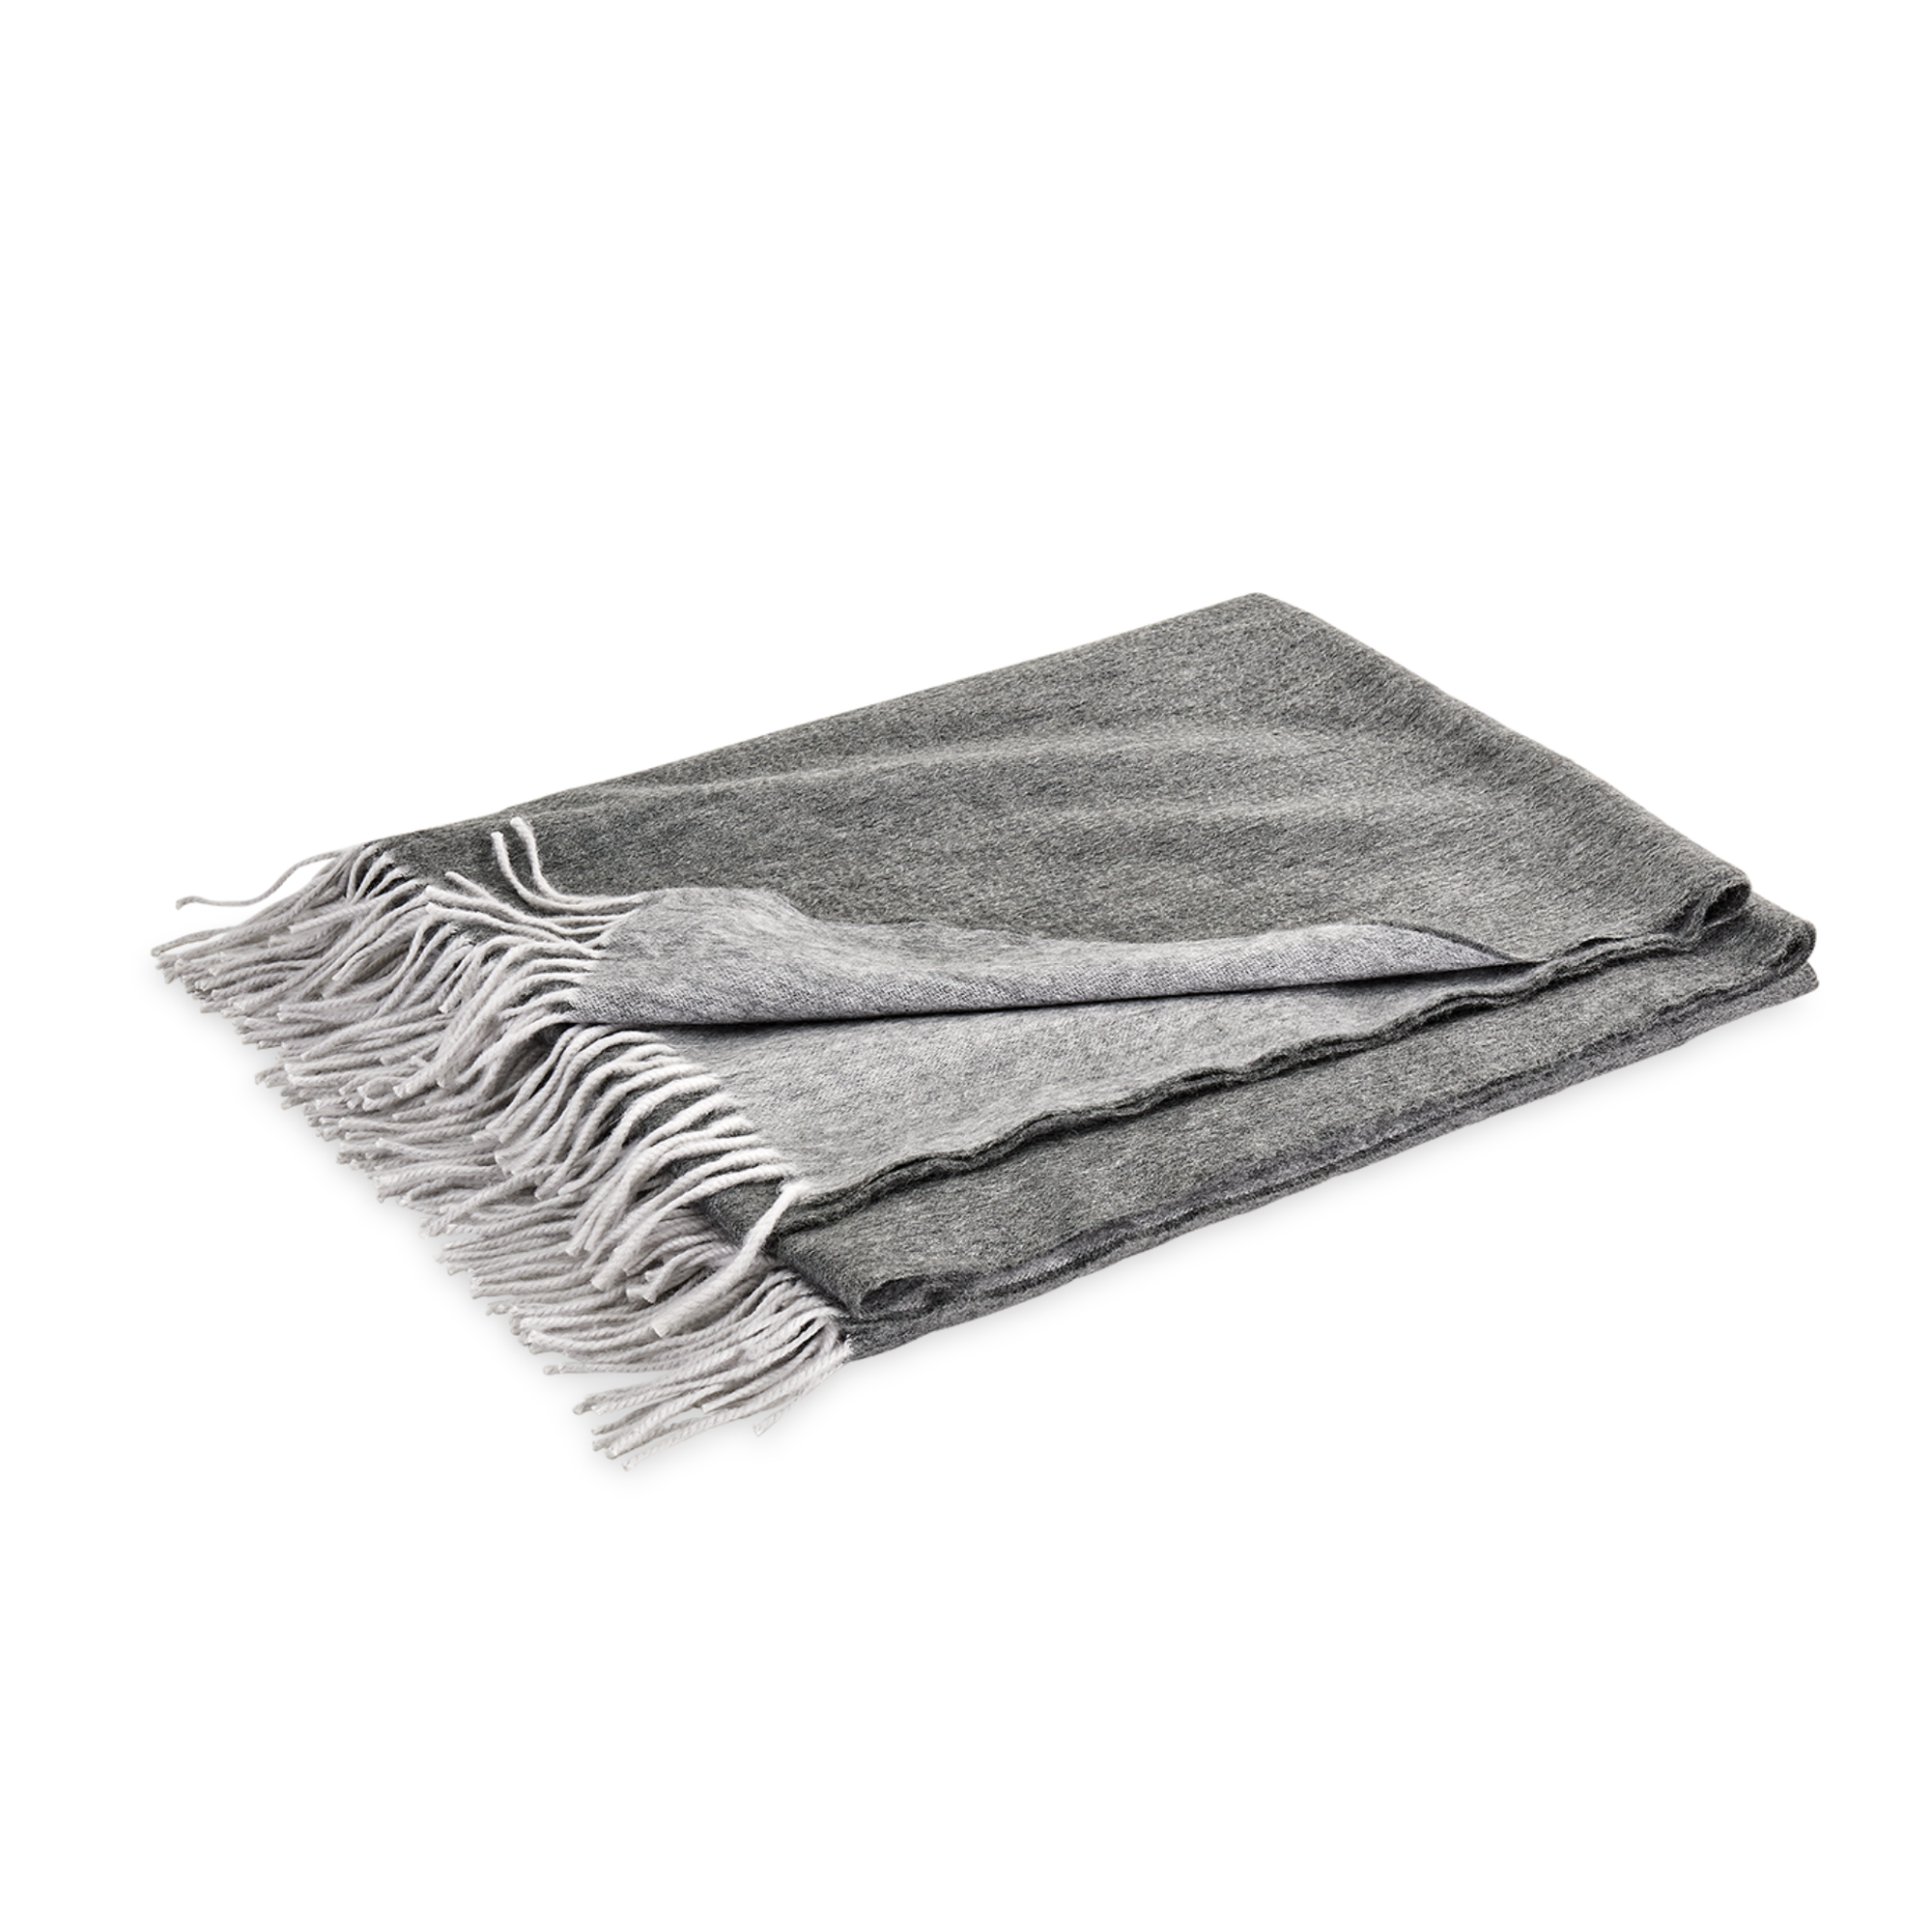 Folded Matouk Paley Throws in Heather and Charcoal Color